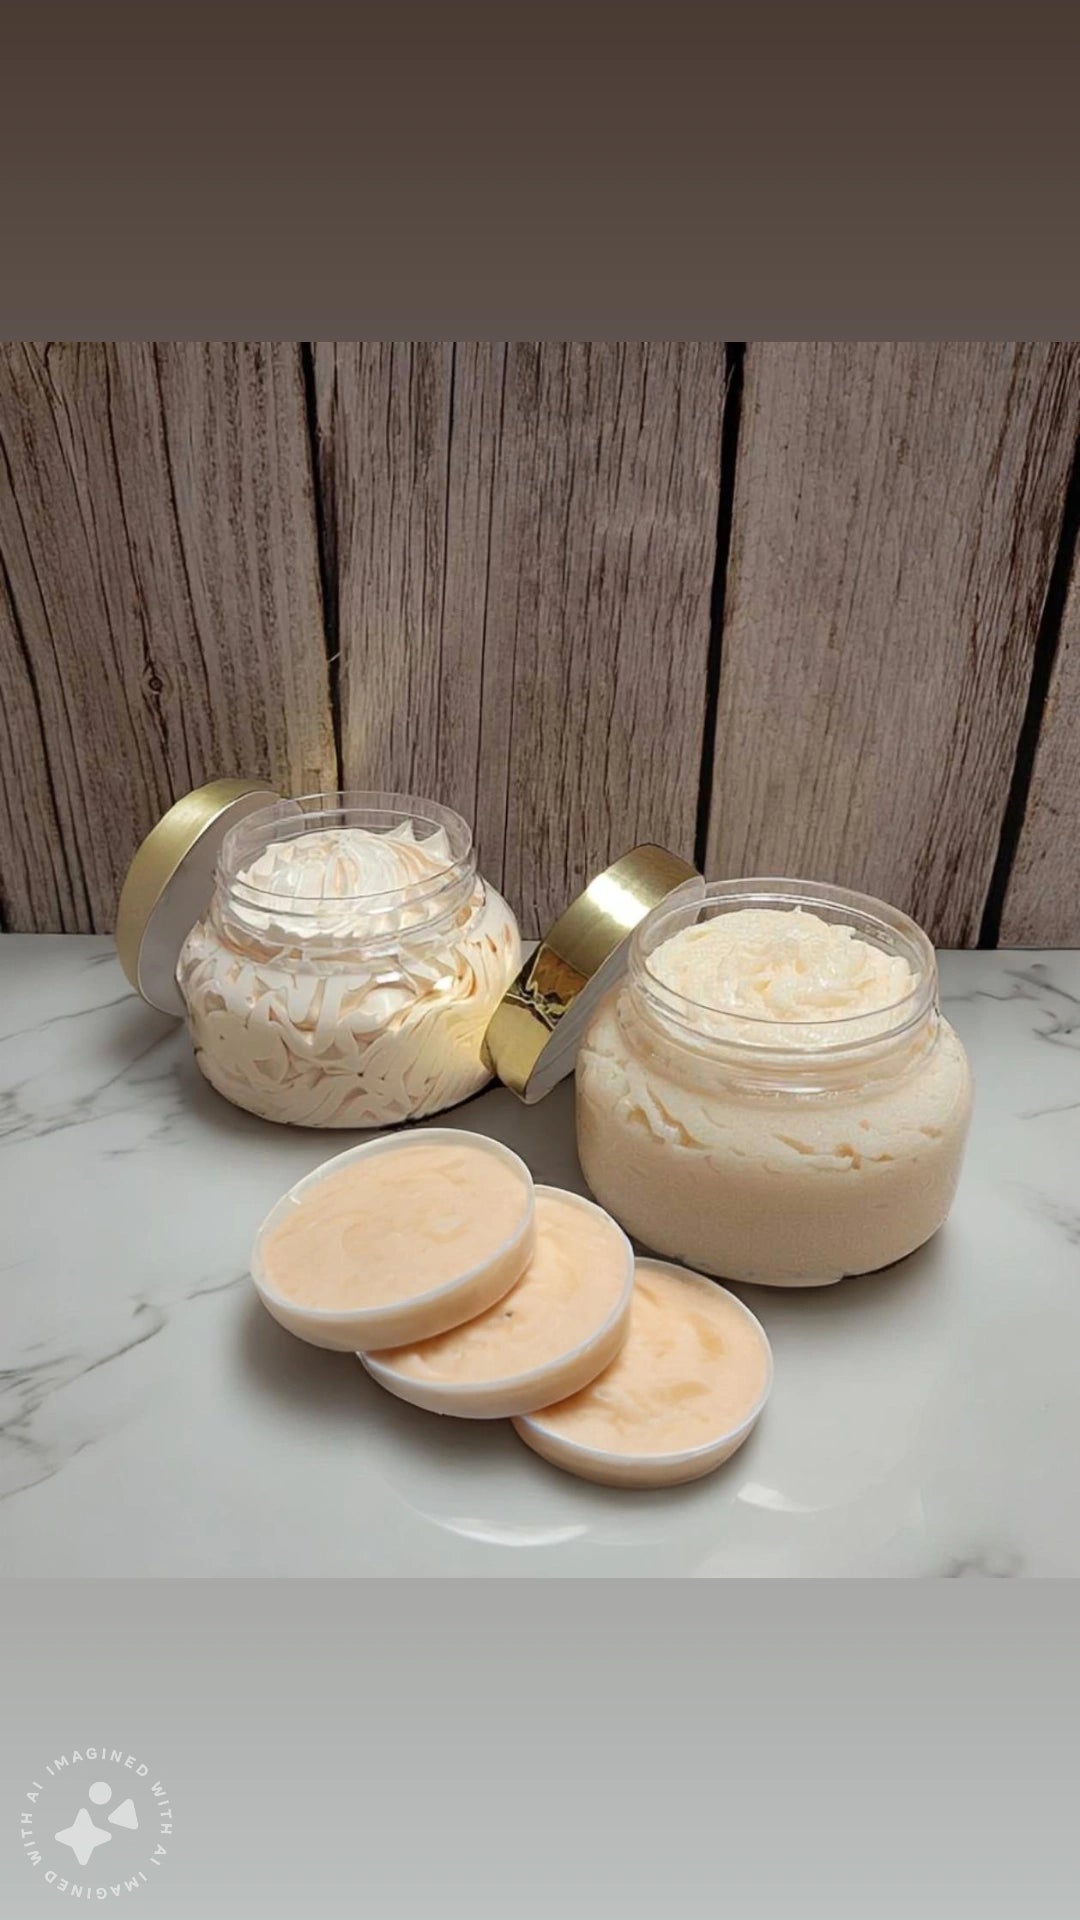 Whipped Peaches & Cream Body Butter and Whipped Foaming Soap Sugar Scrub Set!! 🍑